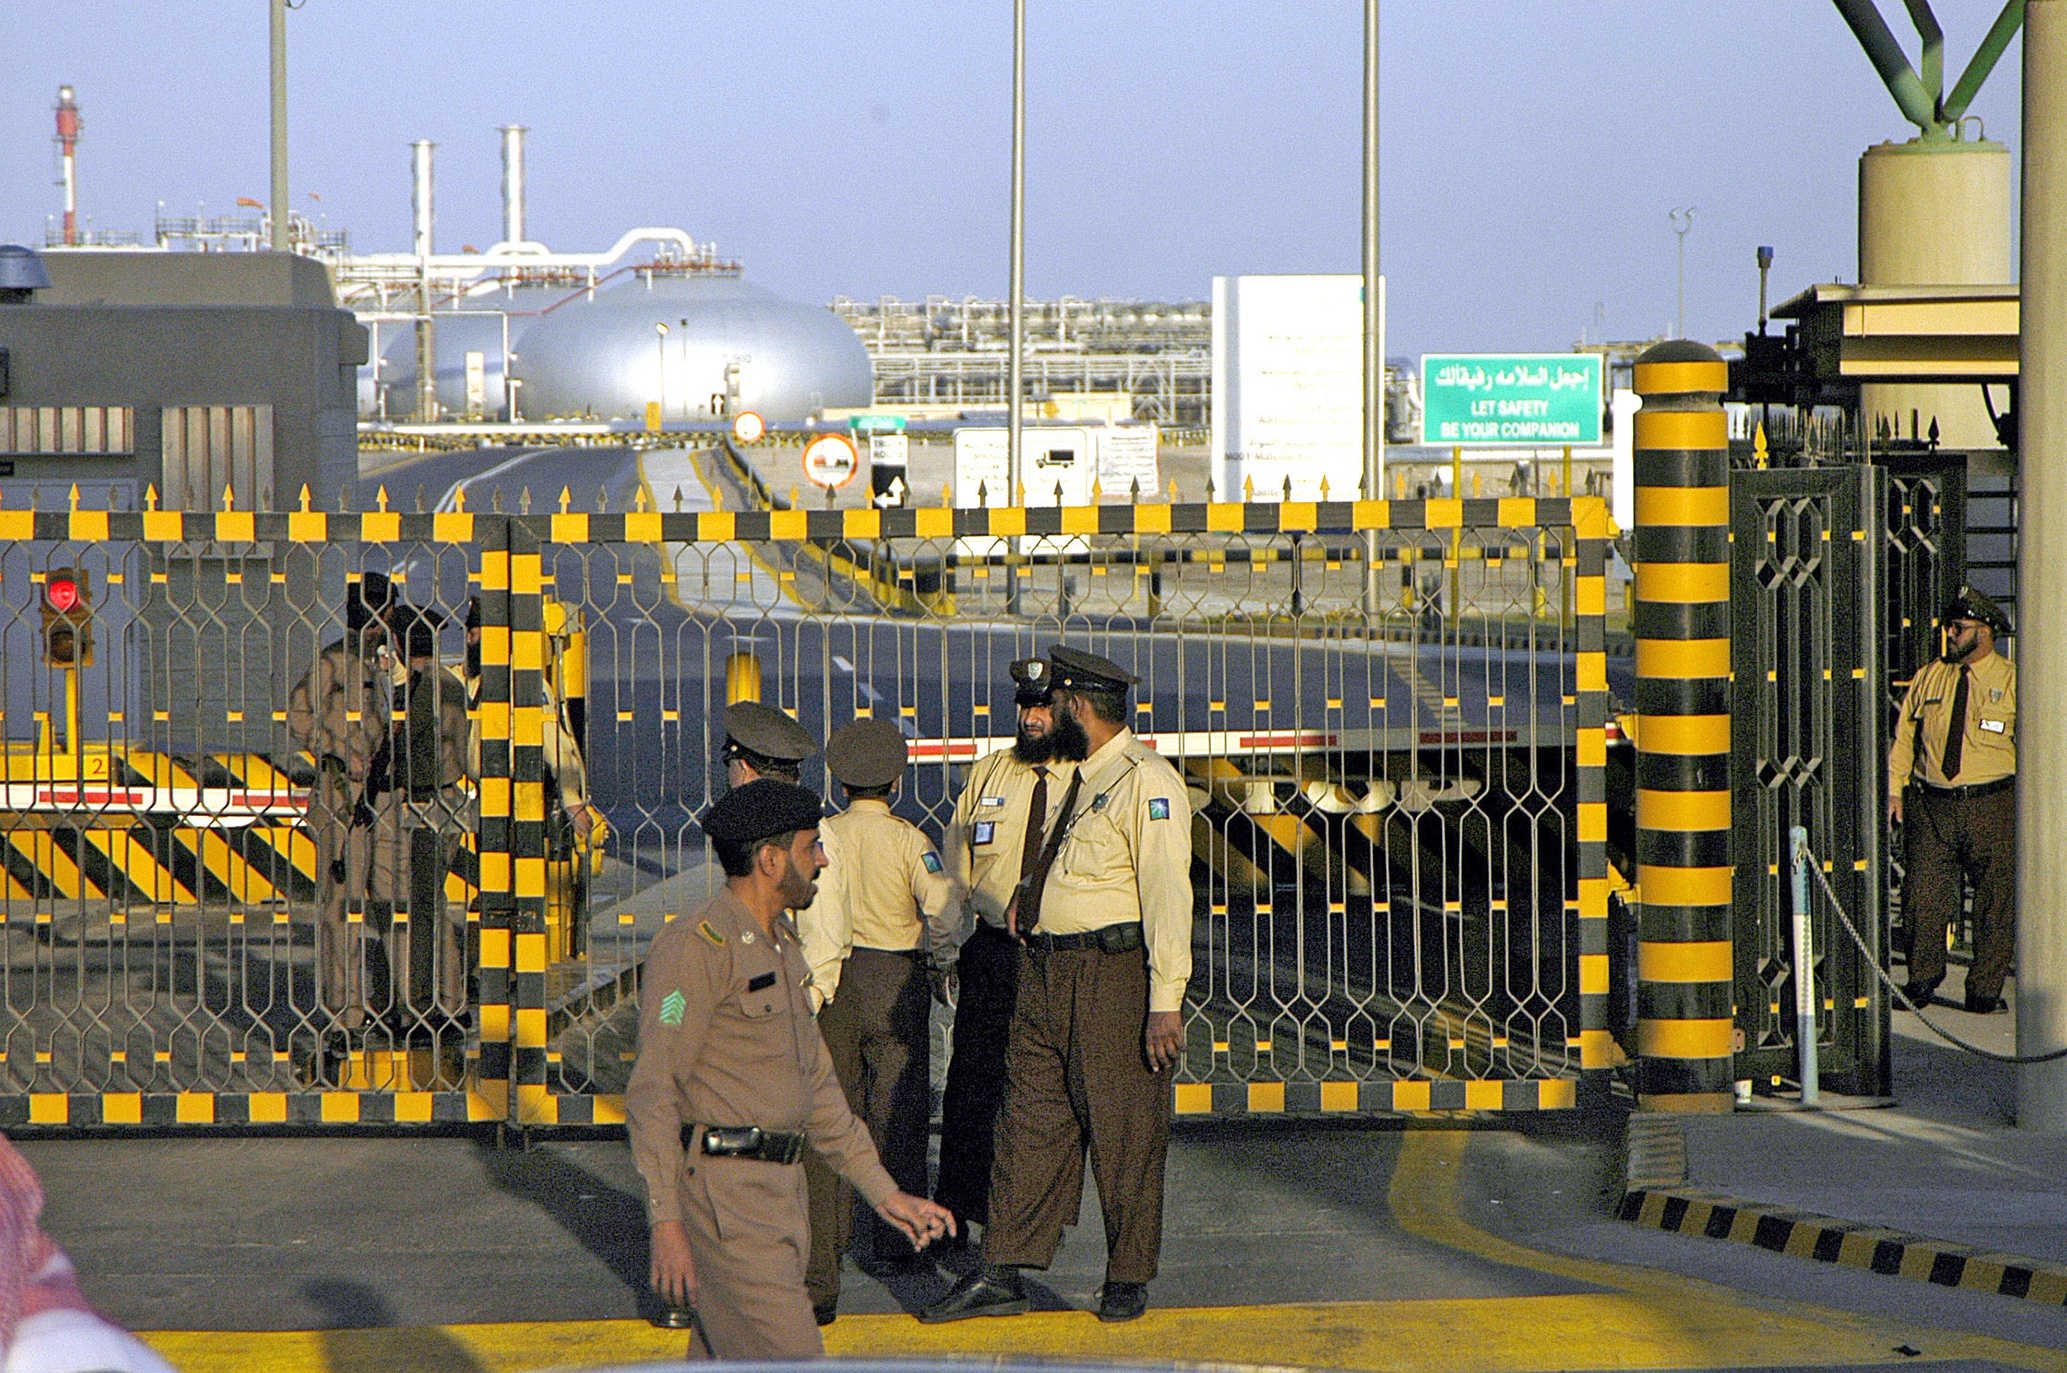 (FILES) In this file photo taken on February 25, 2006, Saudi security men stand at the entrance of the oil processing plant of the state oil giant Aramco in Abqaiq, in the oil-rich Eastern Province. - Saudi Arabia's energy ministry said on May 11, 2020 it had asked oil giant Aramco to make an additional voluntary output cut of one million barrels per day starting from June to support prices. (Photo by - / AFP)